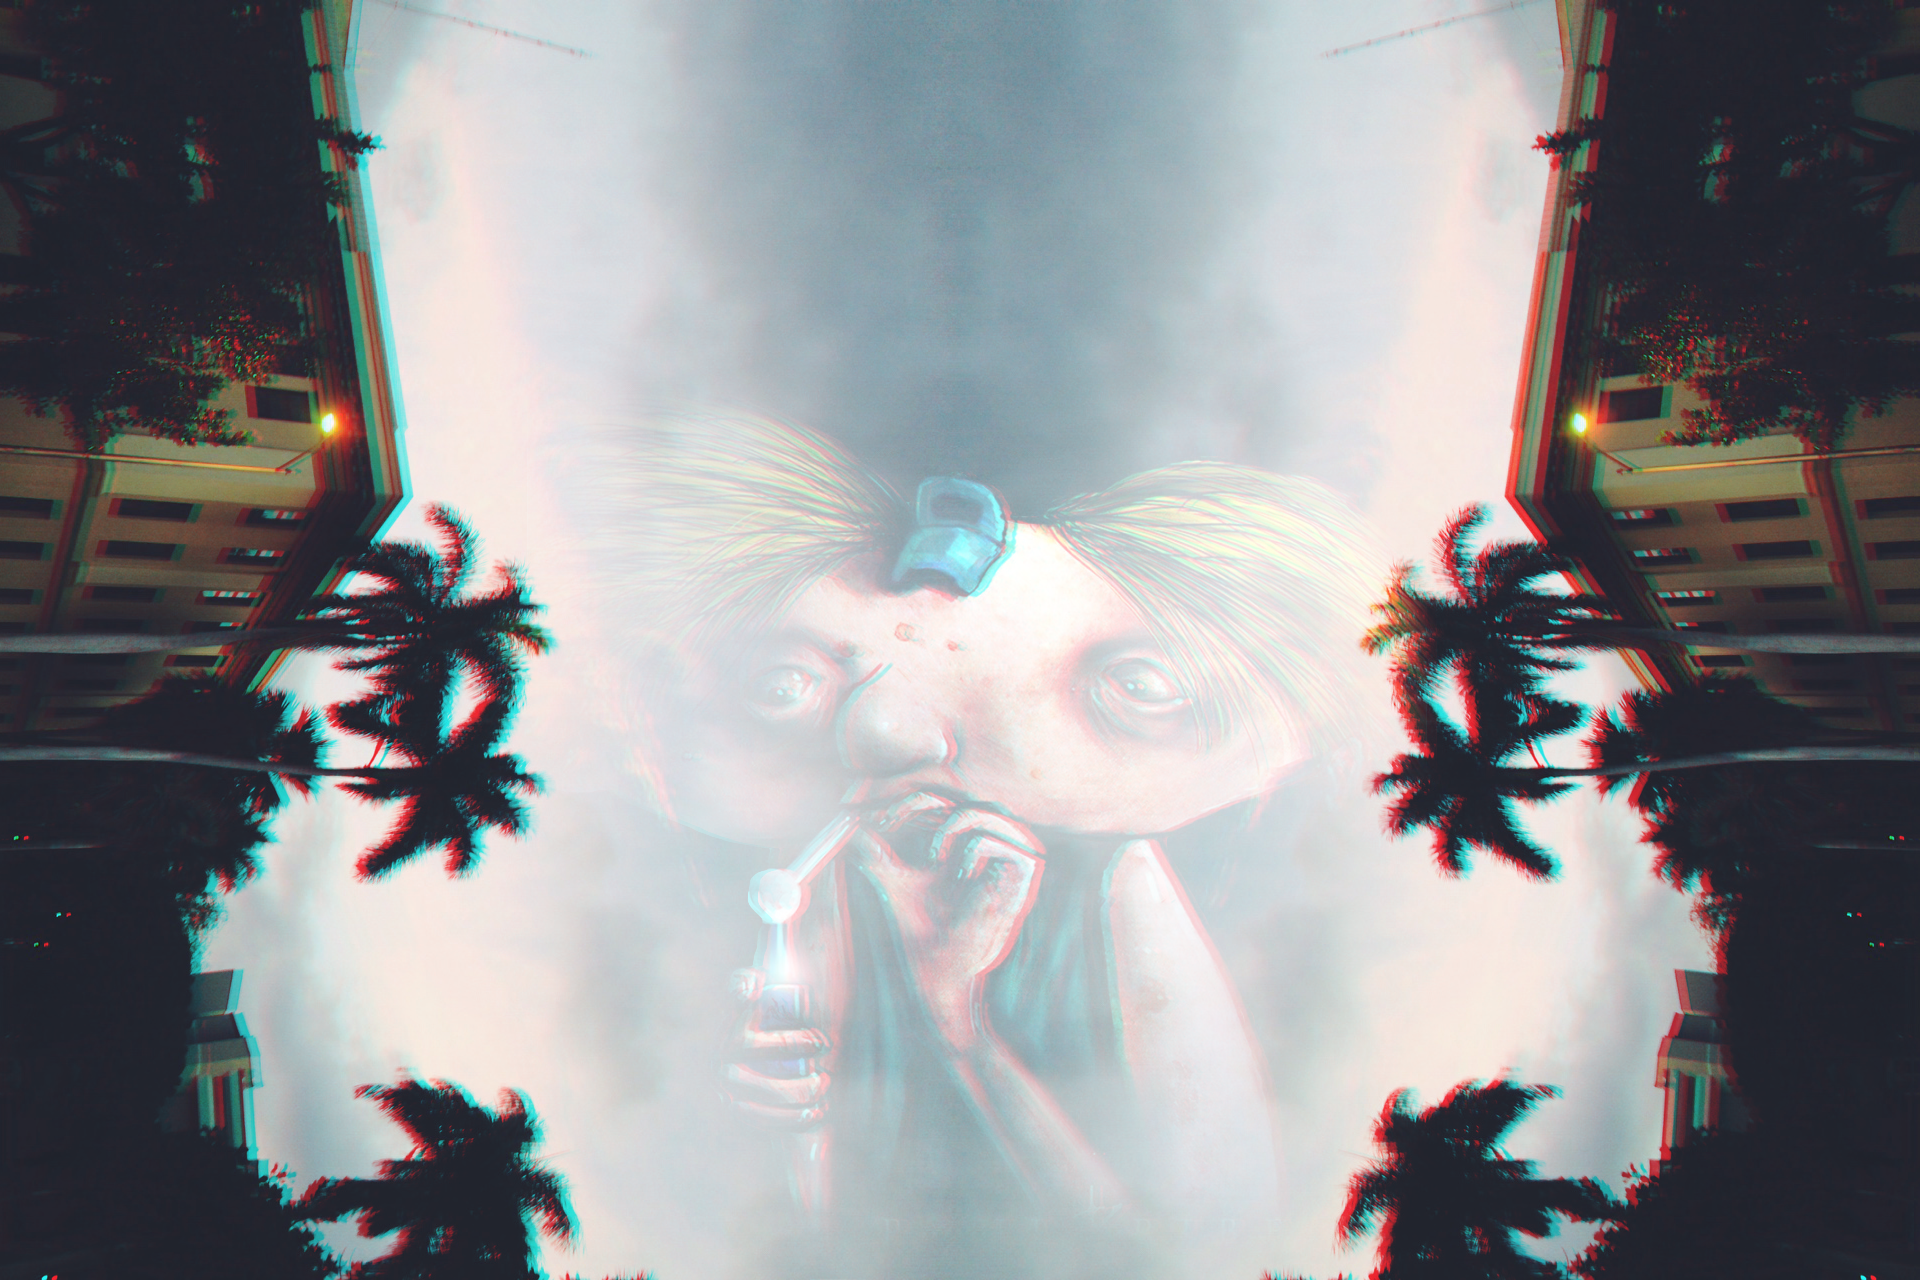 Hey Arnold Sky Palm Trees Anaglyph 3D 1920x1280